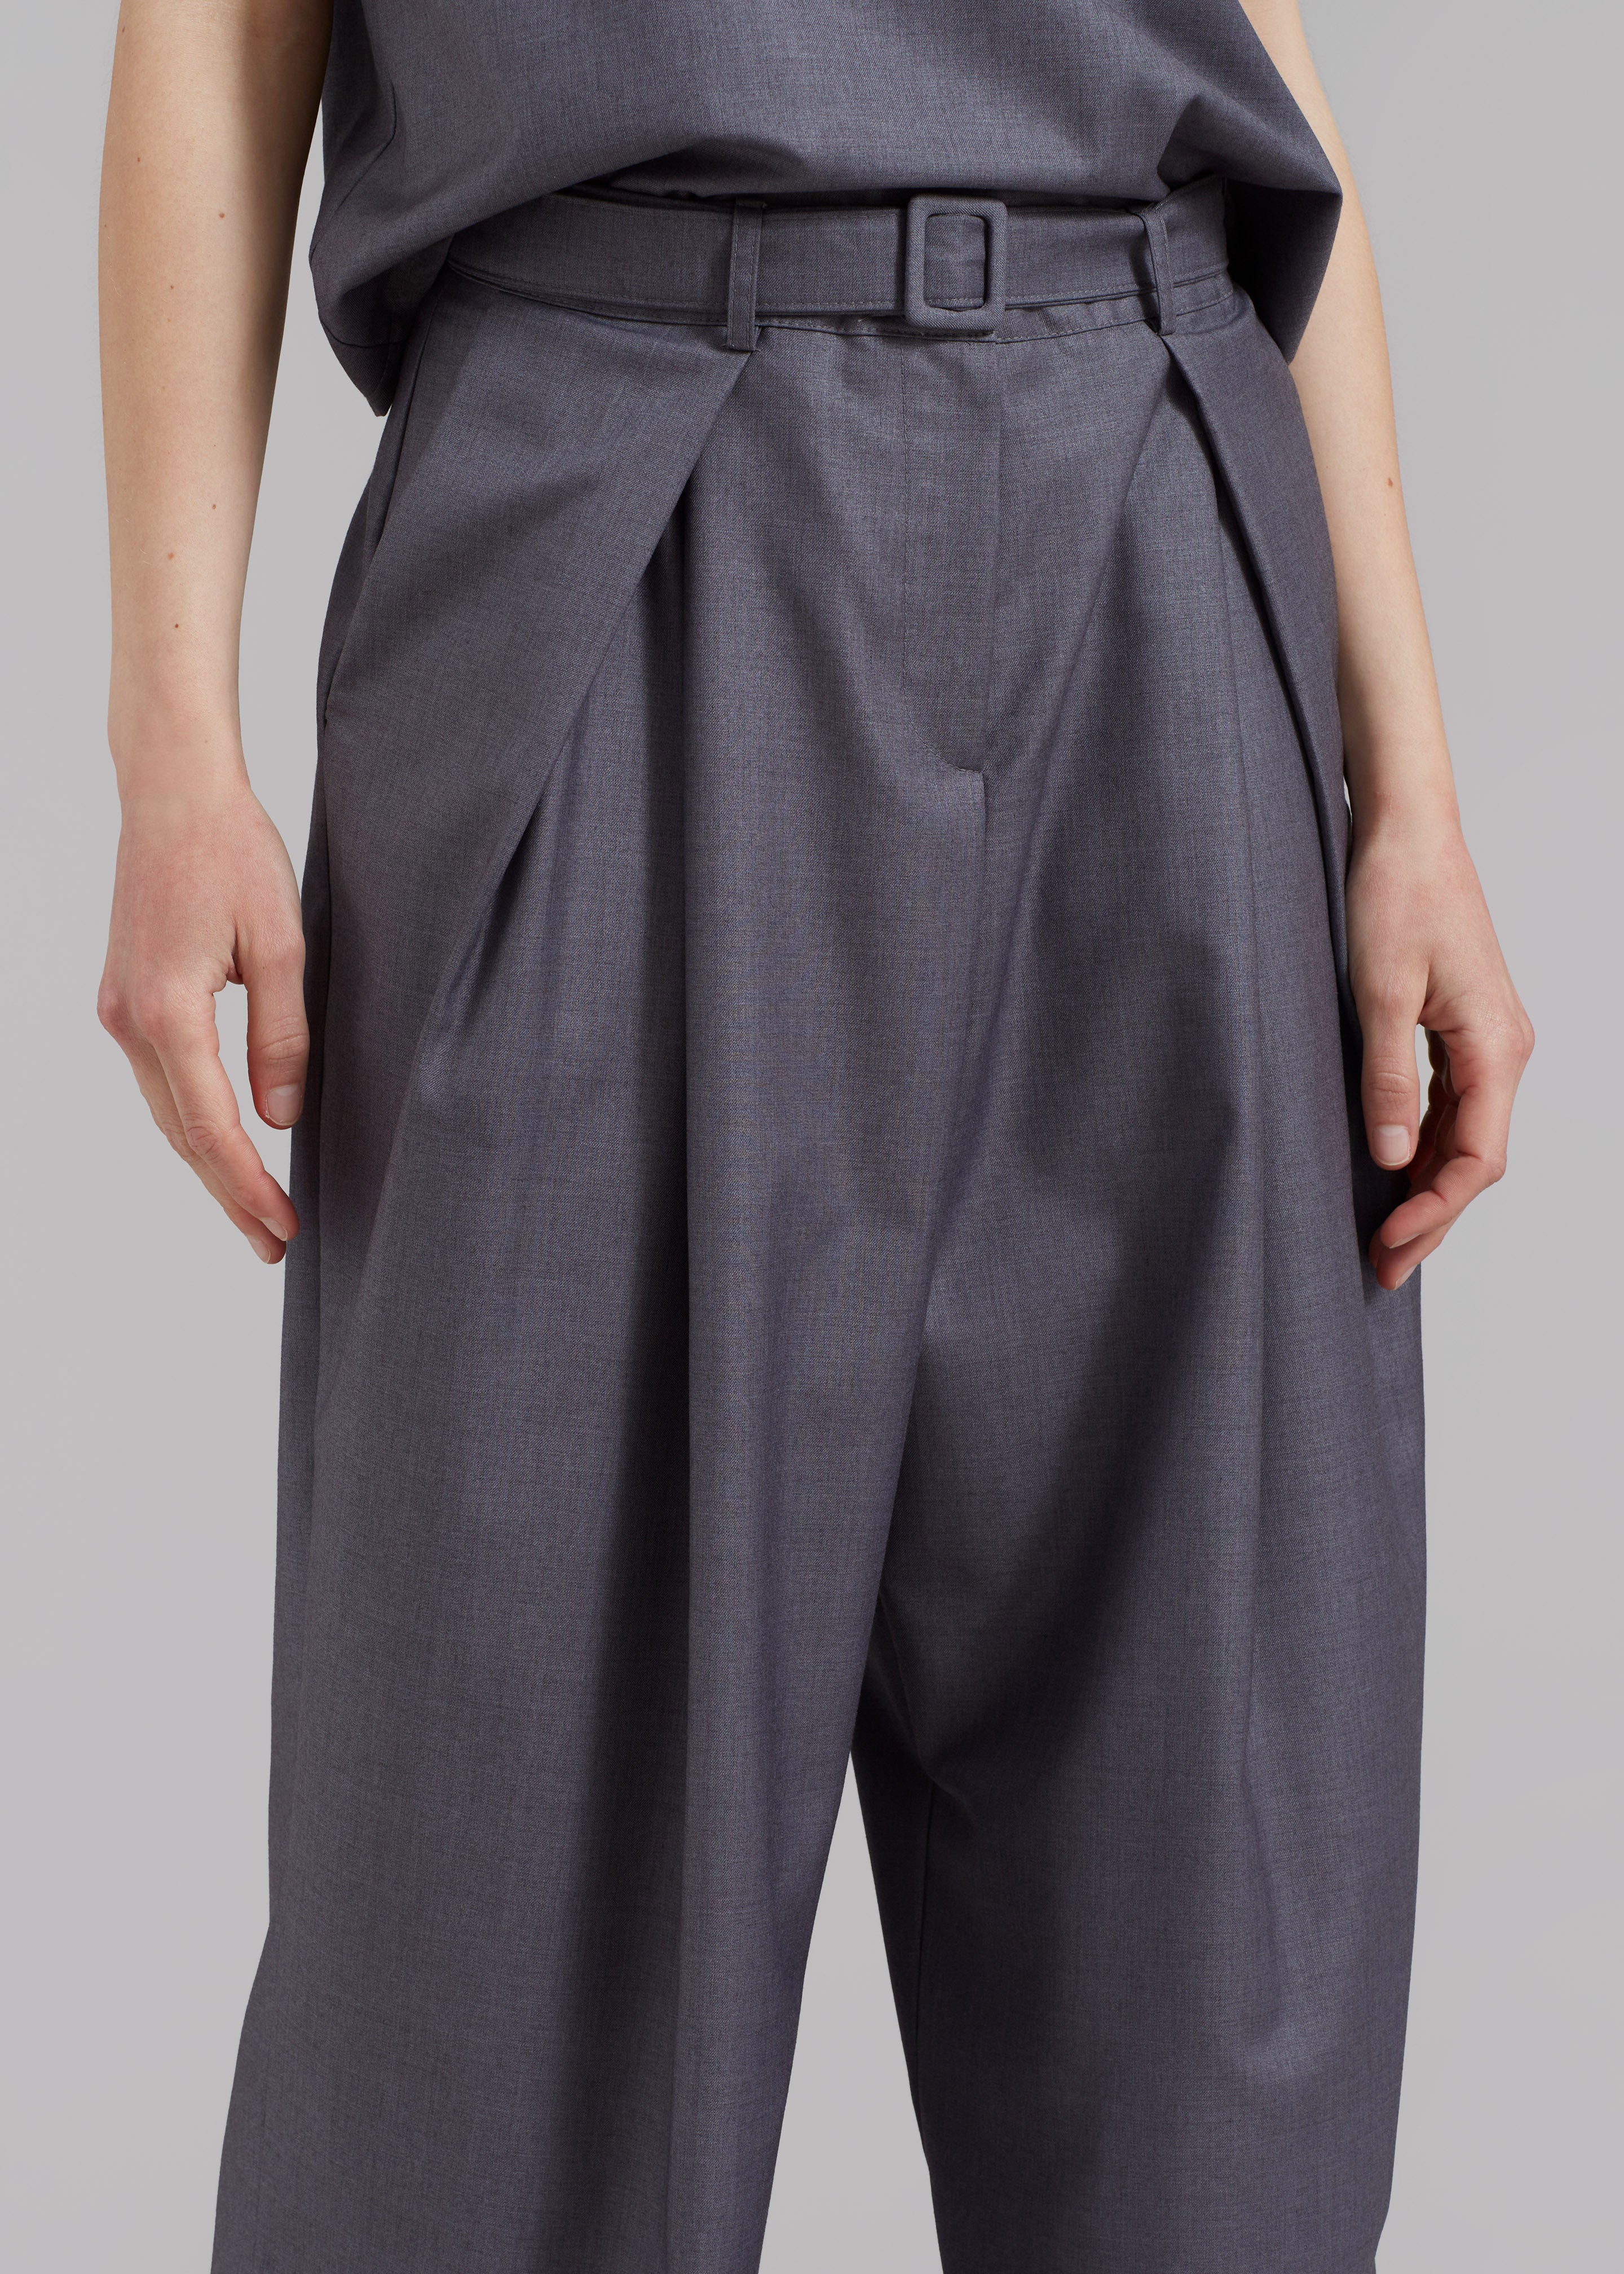 Clay Belted Pants - Grey - 3